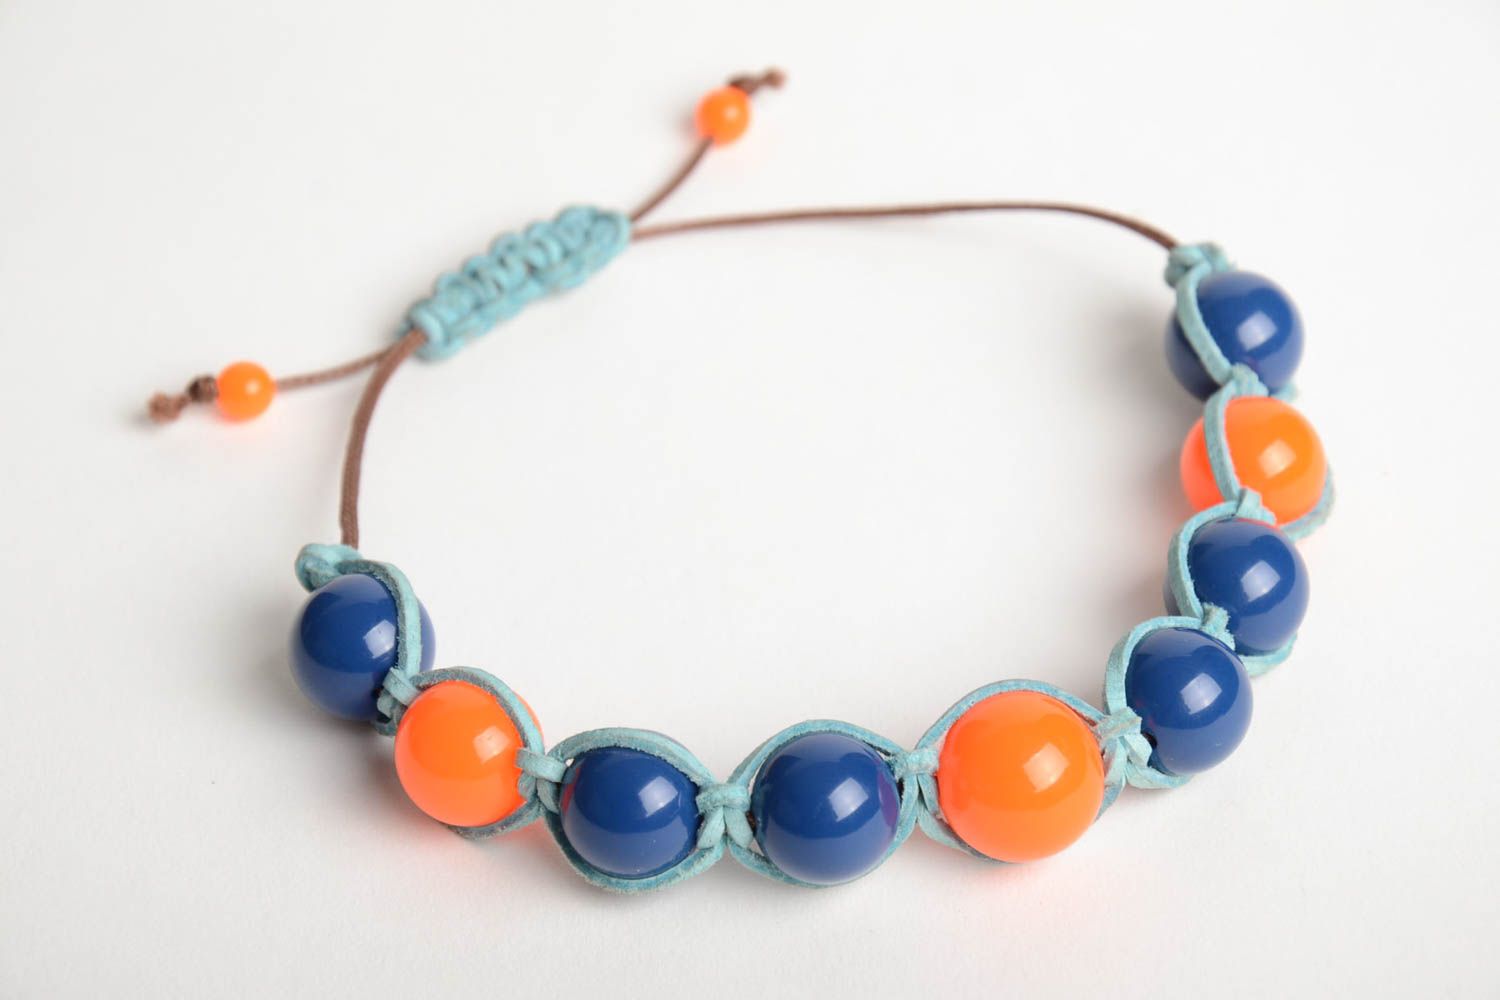 Handmade wrist bracelet woven of blue waxed cord and colorful plastic beads photo 3